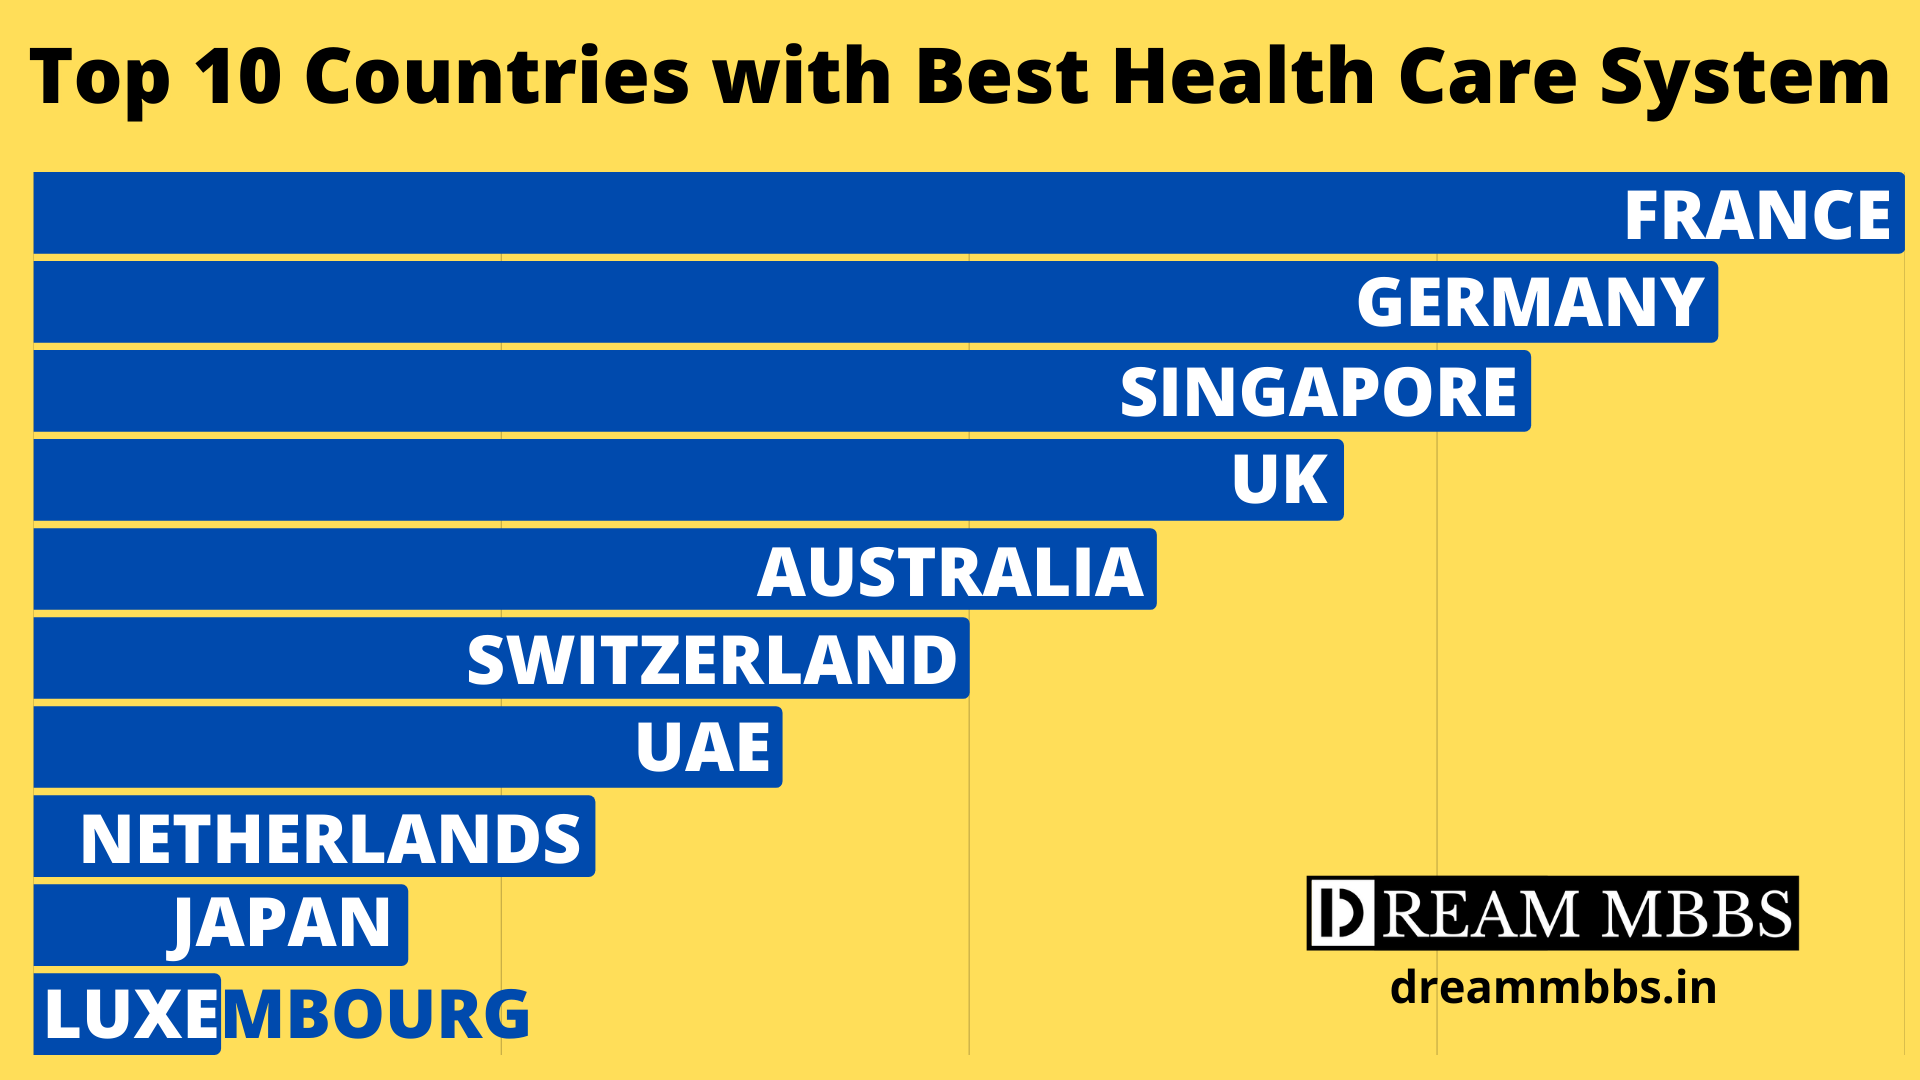 Top 10 Countries with Best Health Care System